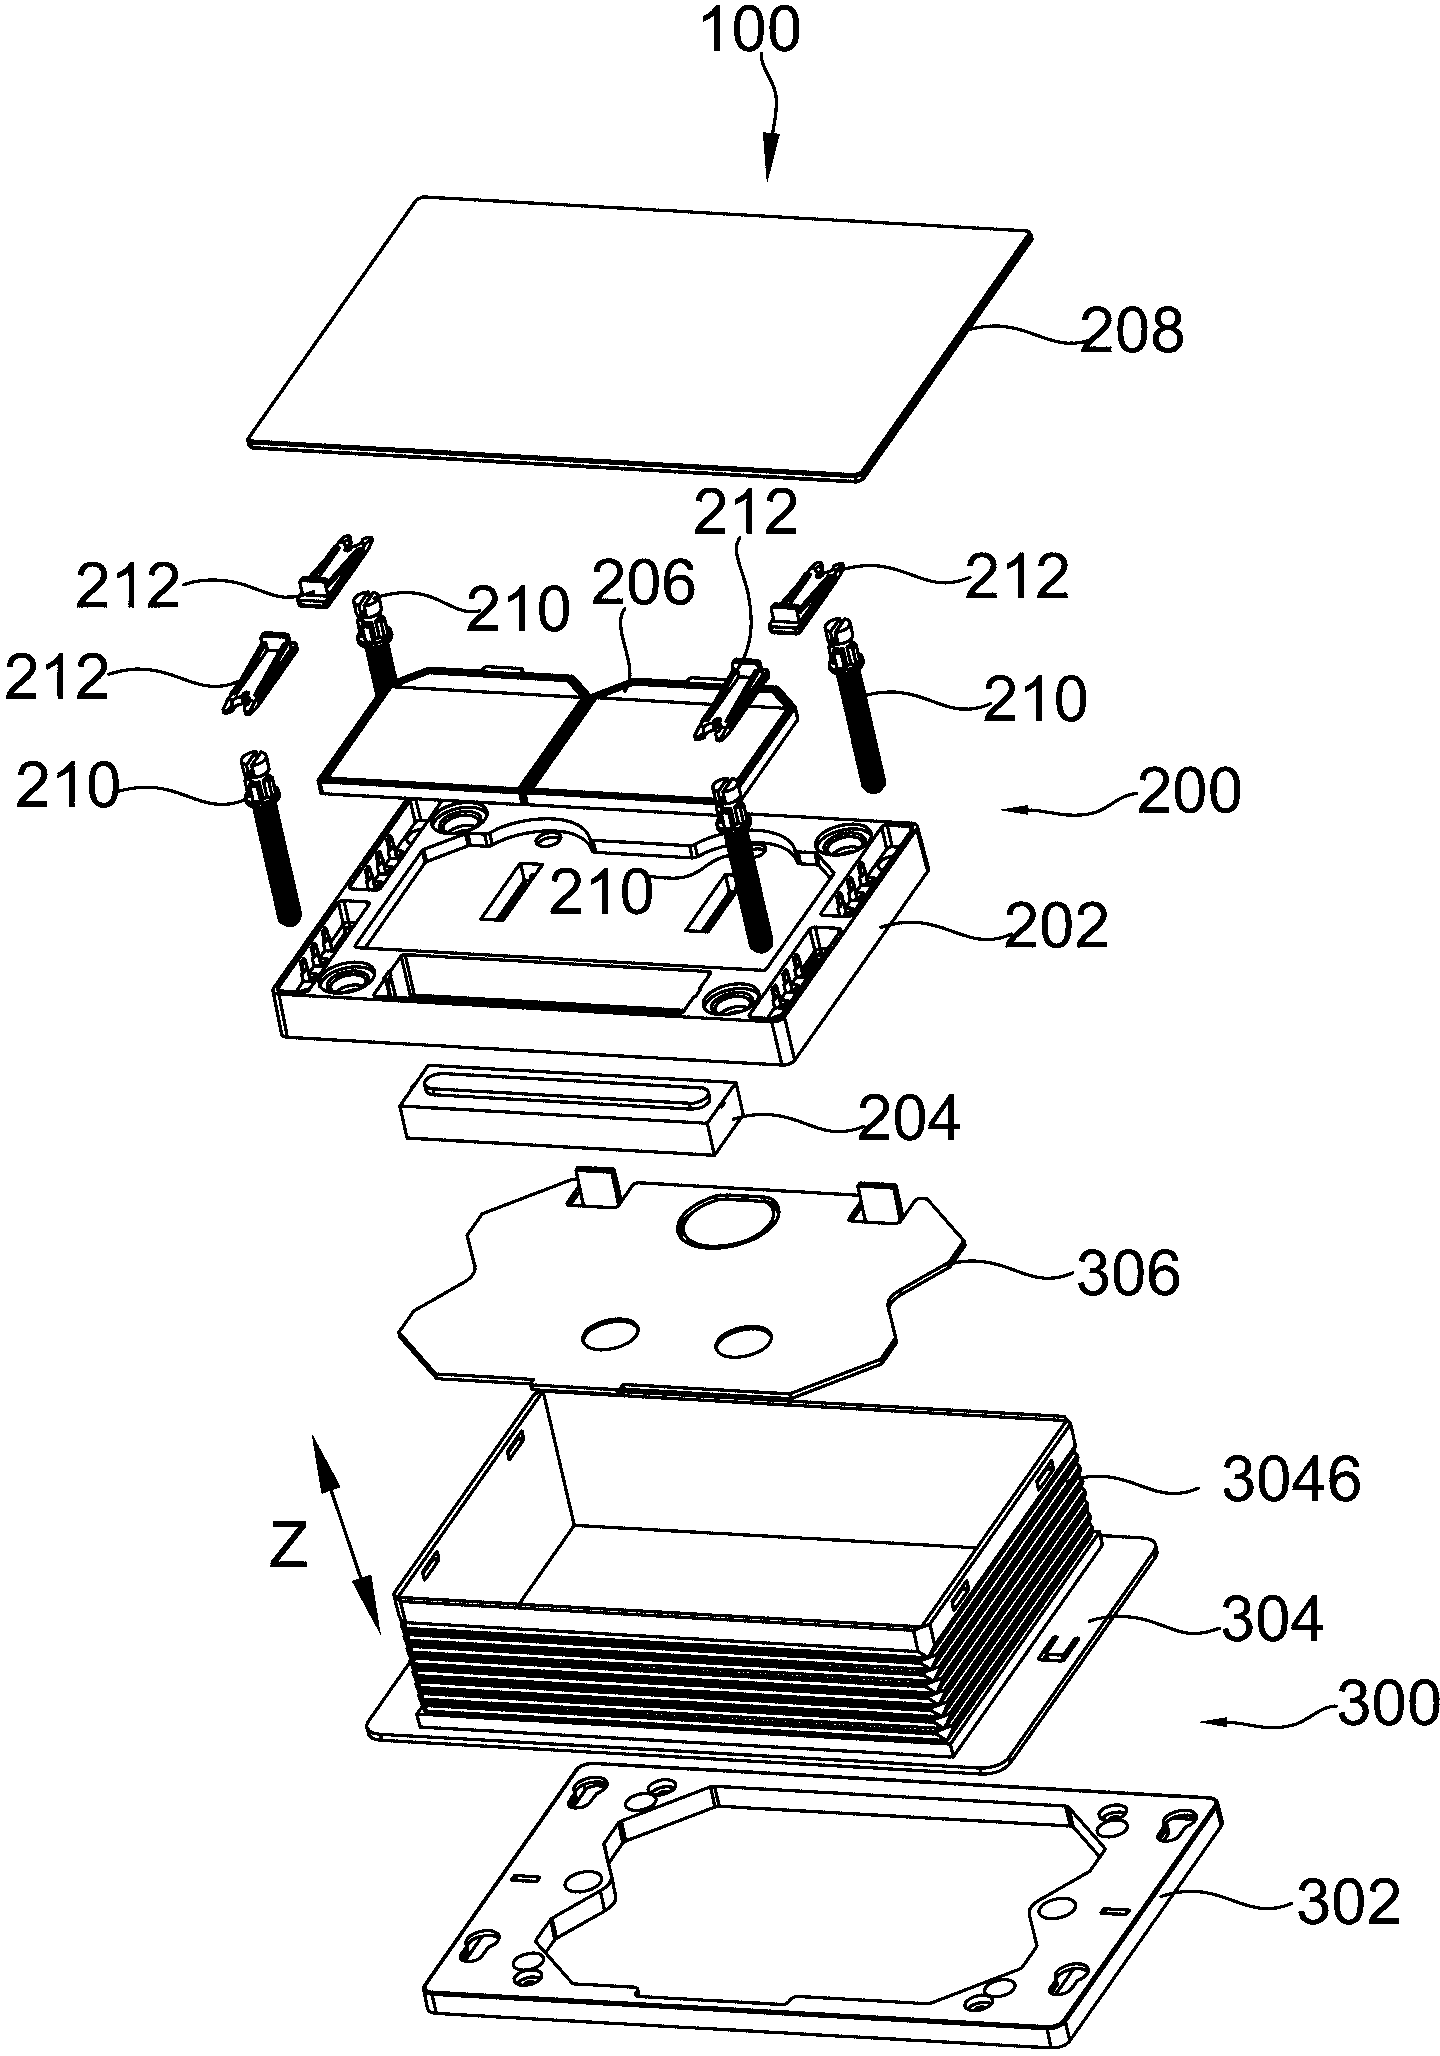 Flush panel structure of concealed water tank and concealed water tank